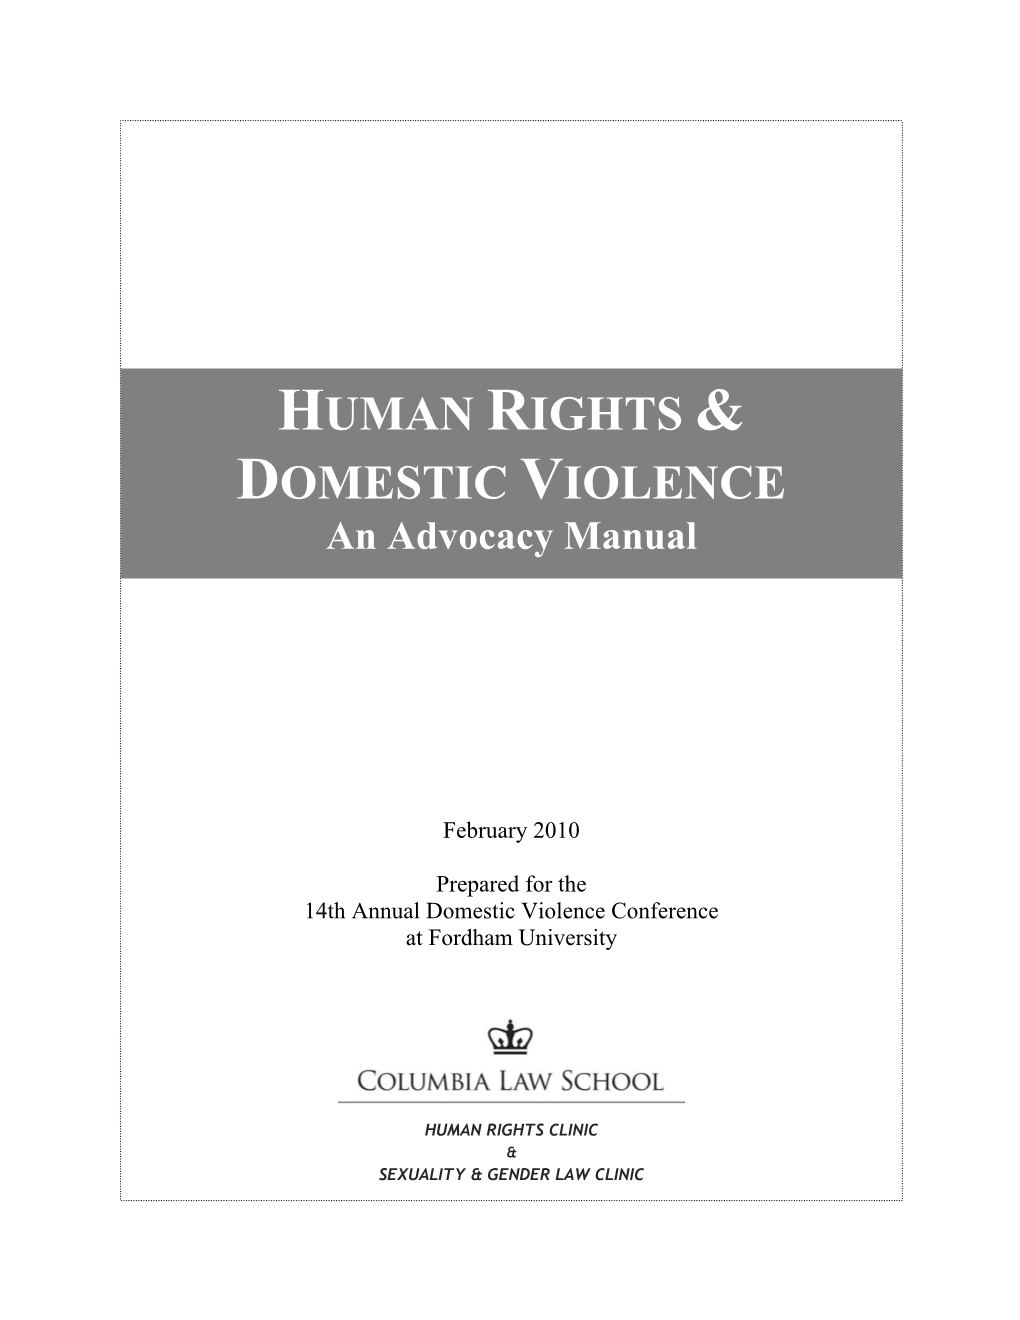 Human Rights and Domestic Violence: an Advocacy Manual